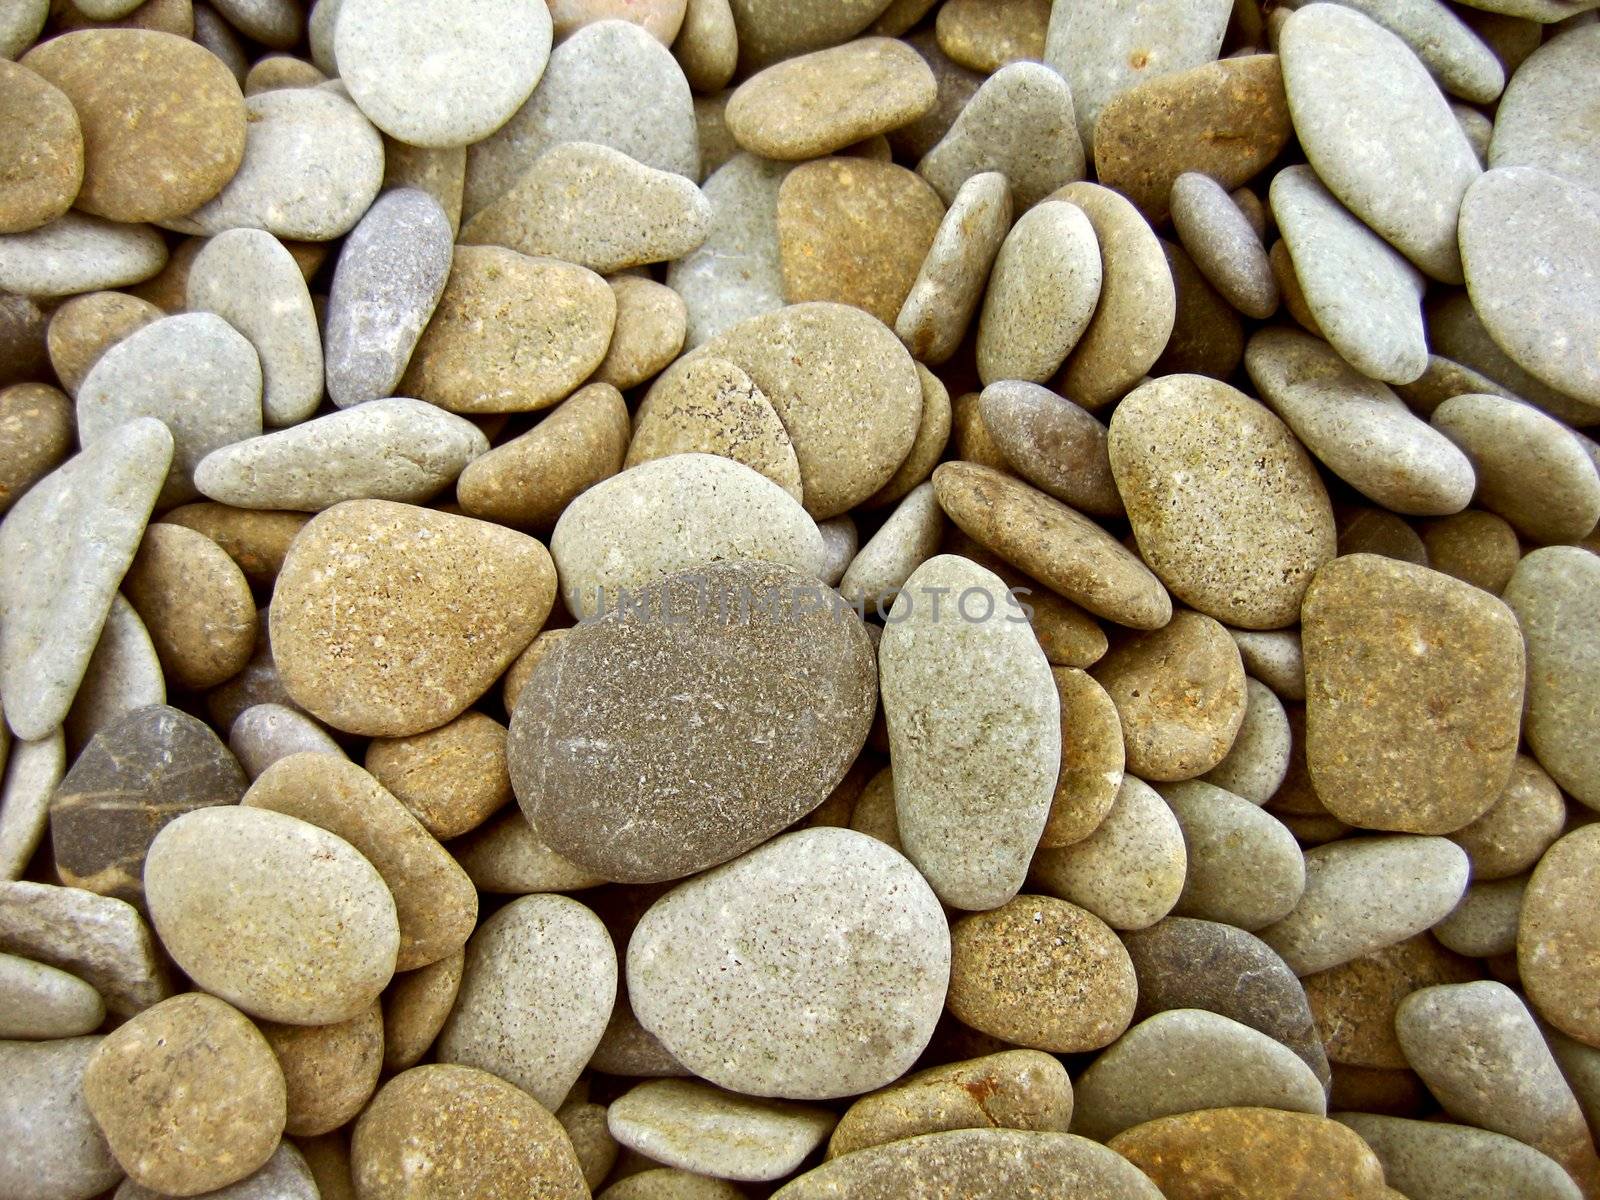 Sand stone background on the beach and sea